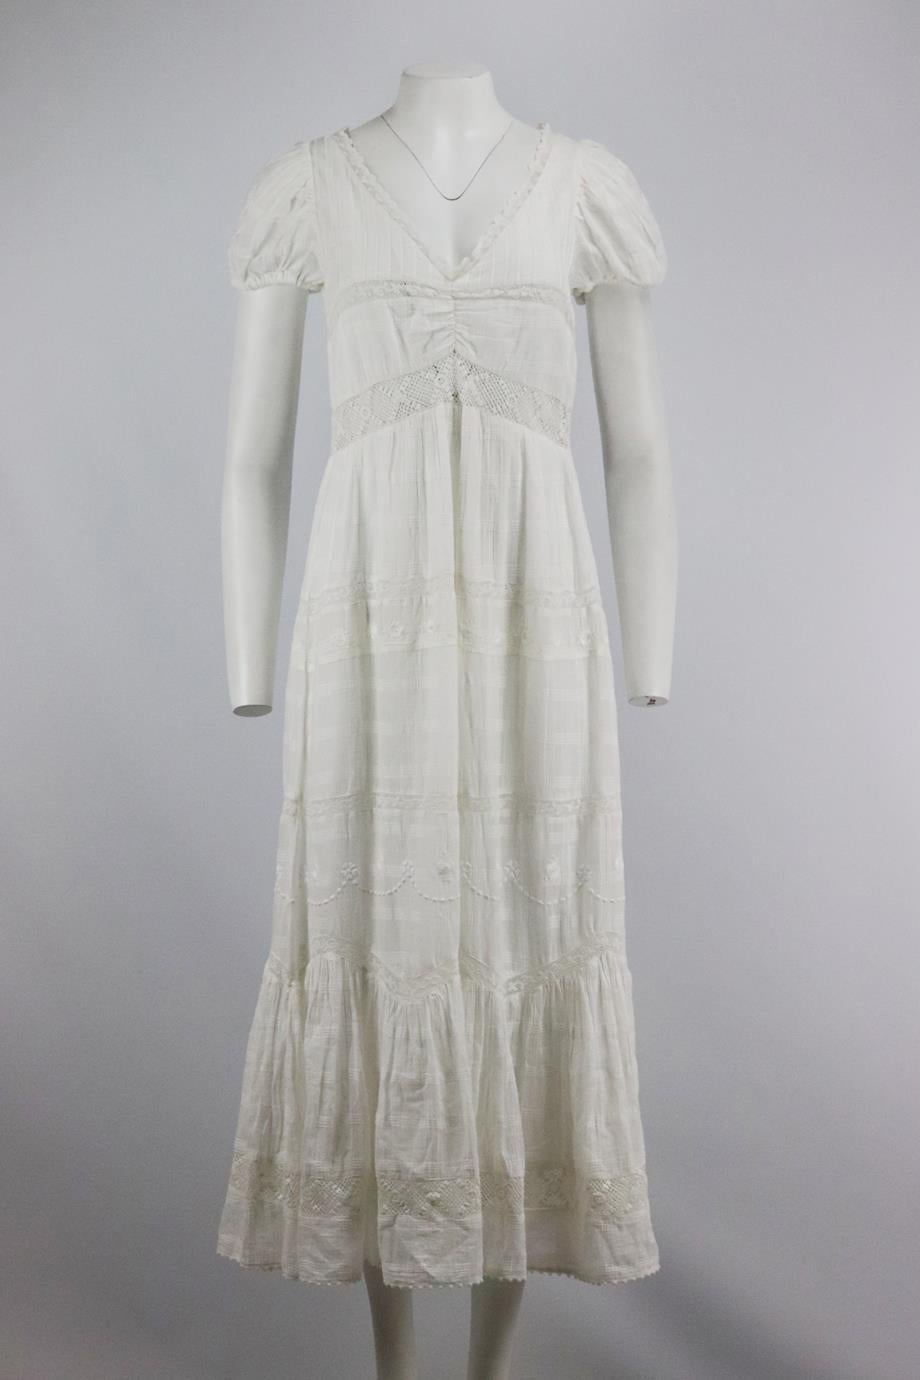 LoveShackFancy broderie anglaise cotton voile maxi dress. White. Short sleeve, v-neck. Zip fastening at side. 100% Cotton. Size: US 4 (UK 8, FR 36, IT 40). Bust: 35 in. Waist: 30 in. Hips: 46 in. Length: 52 in. Very good condition - As new